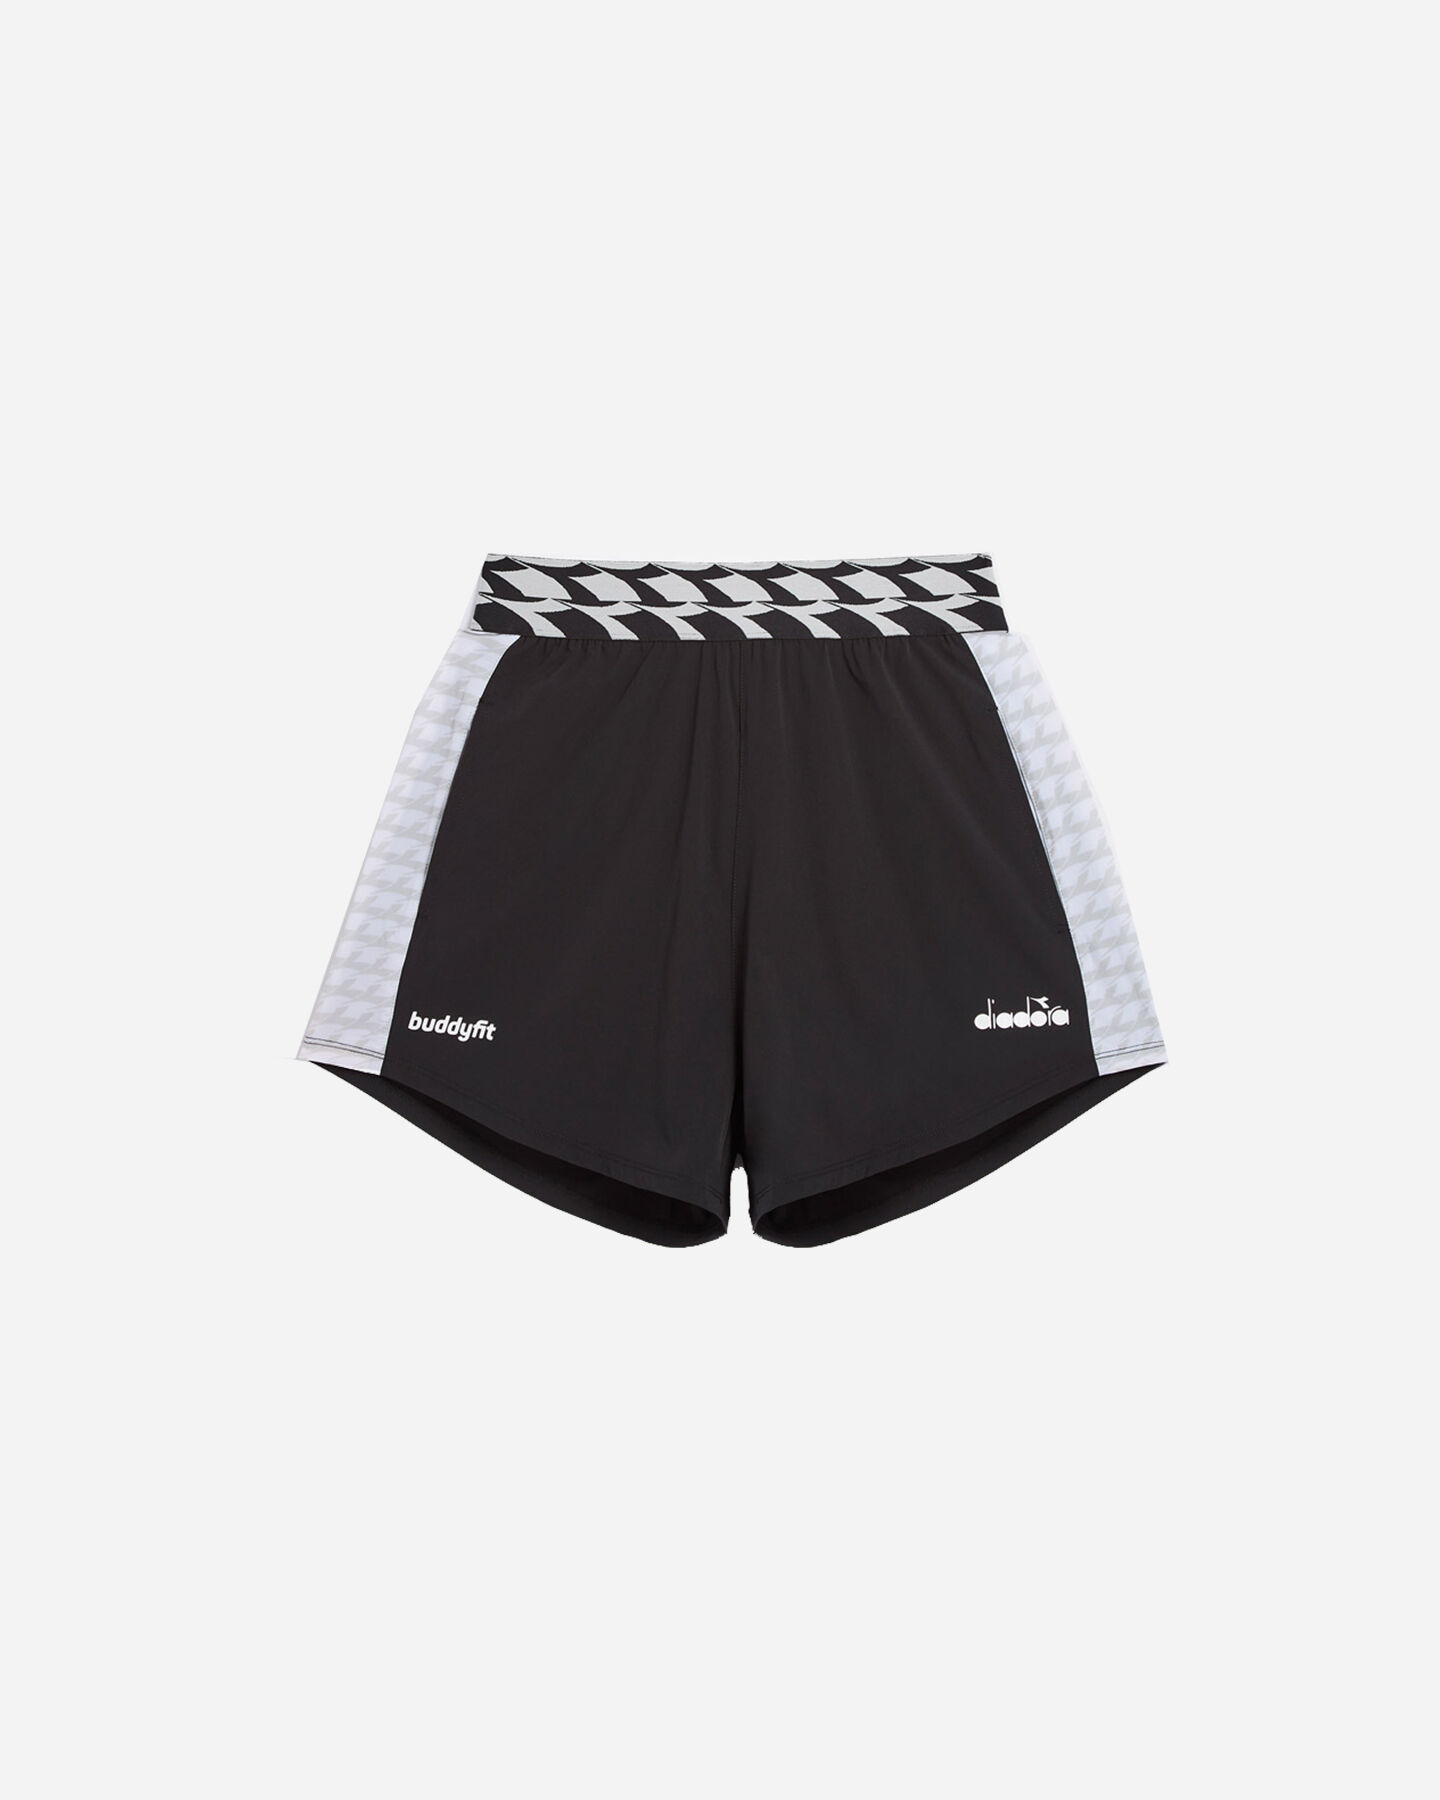  Short training DIADORA BUDDY FIT INSERT IN CONTRAST W S5366325|80013|XS scatto 4